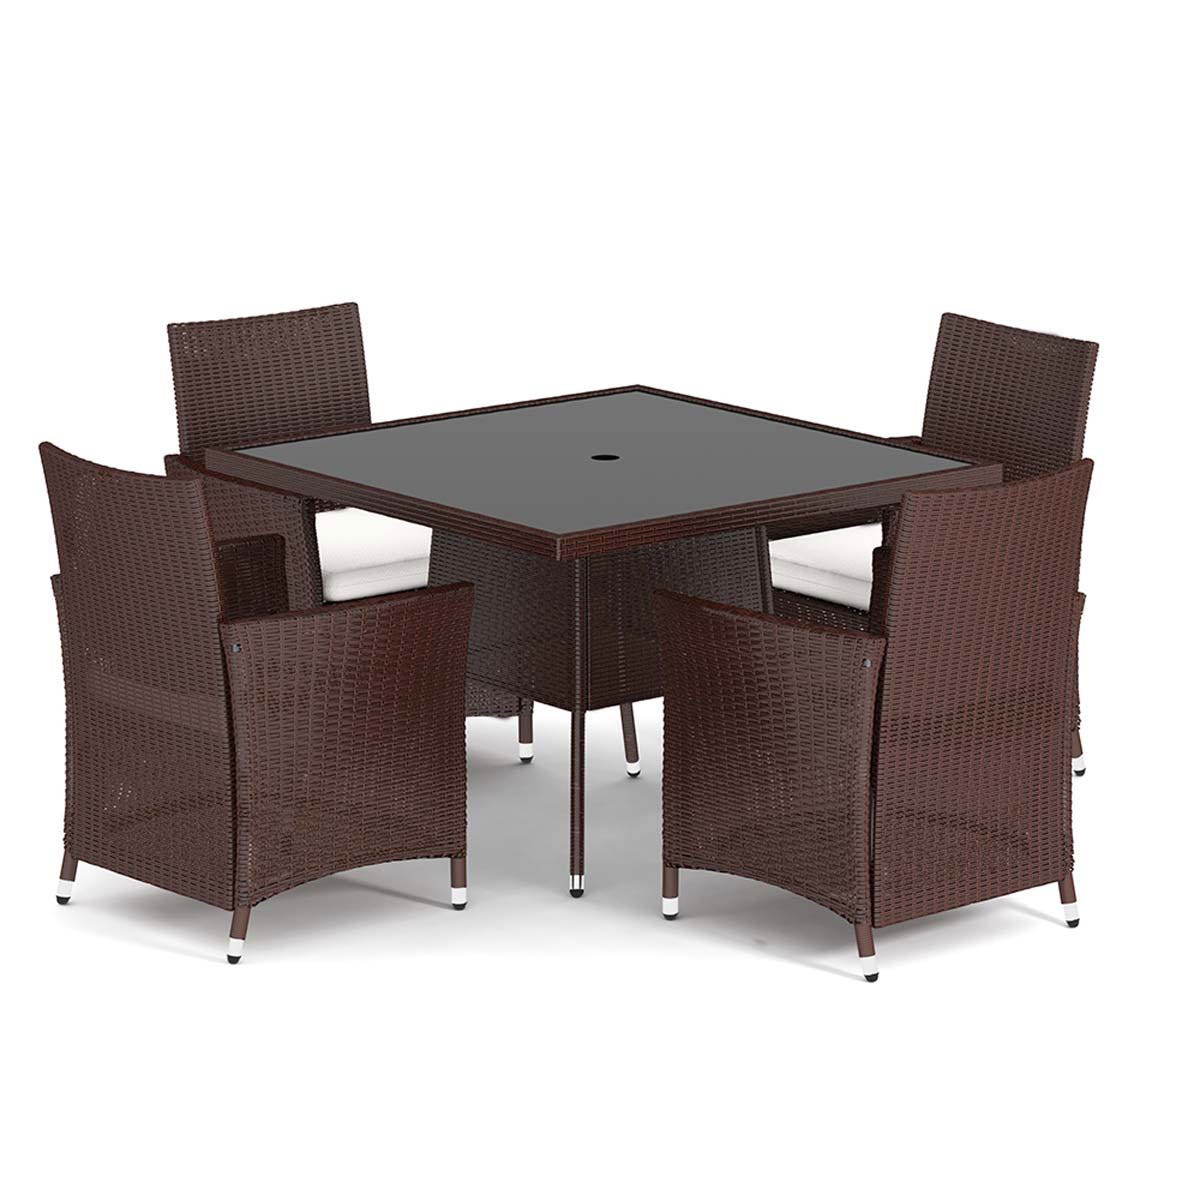 Livingandhome 4 Seater Rattan Garden Dining Set Square Table - Brown